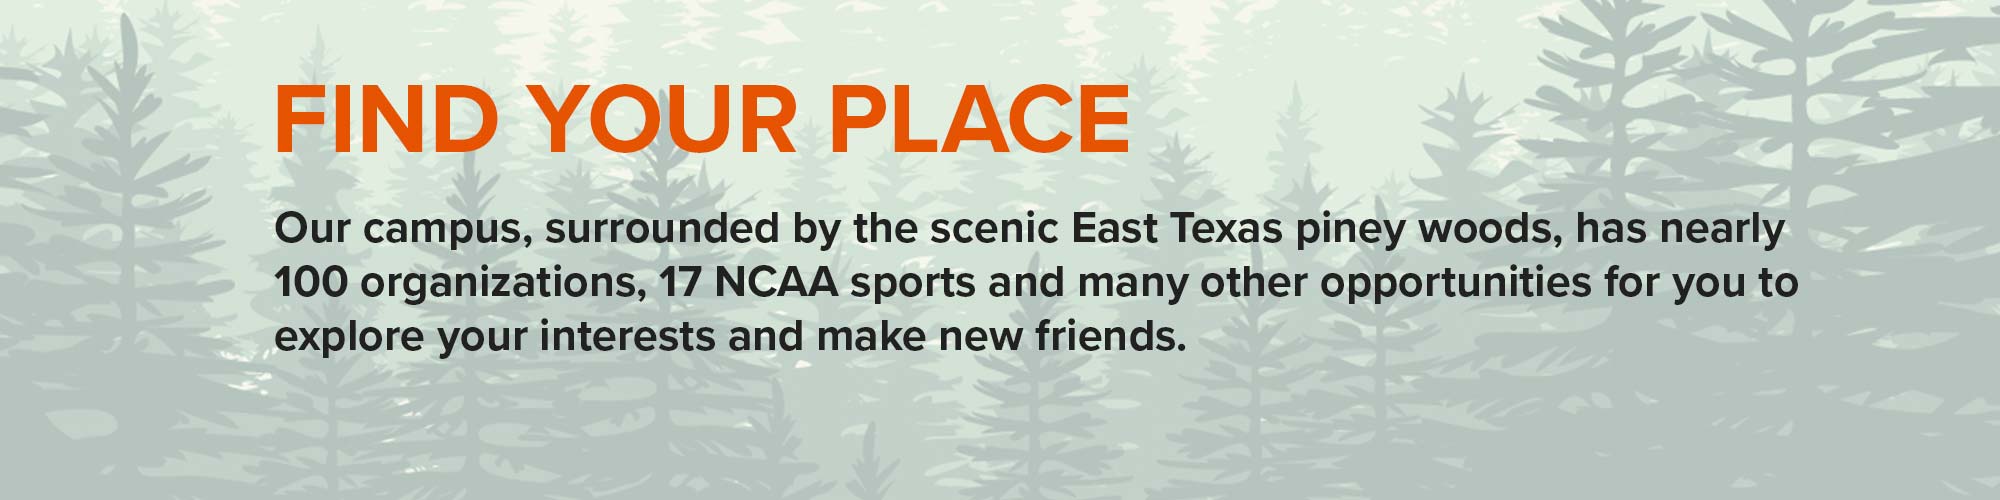 Find Your Place - Our campus, surrounded by the scenic East Texas piney woods...